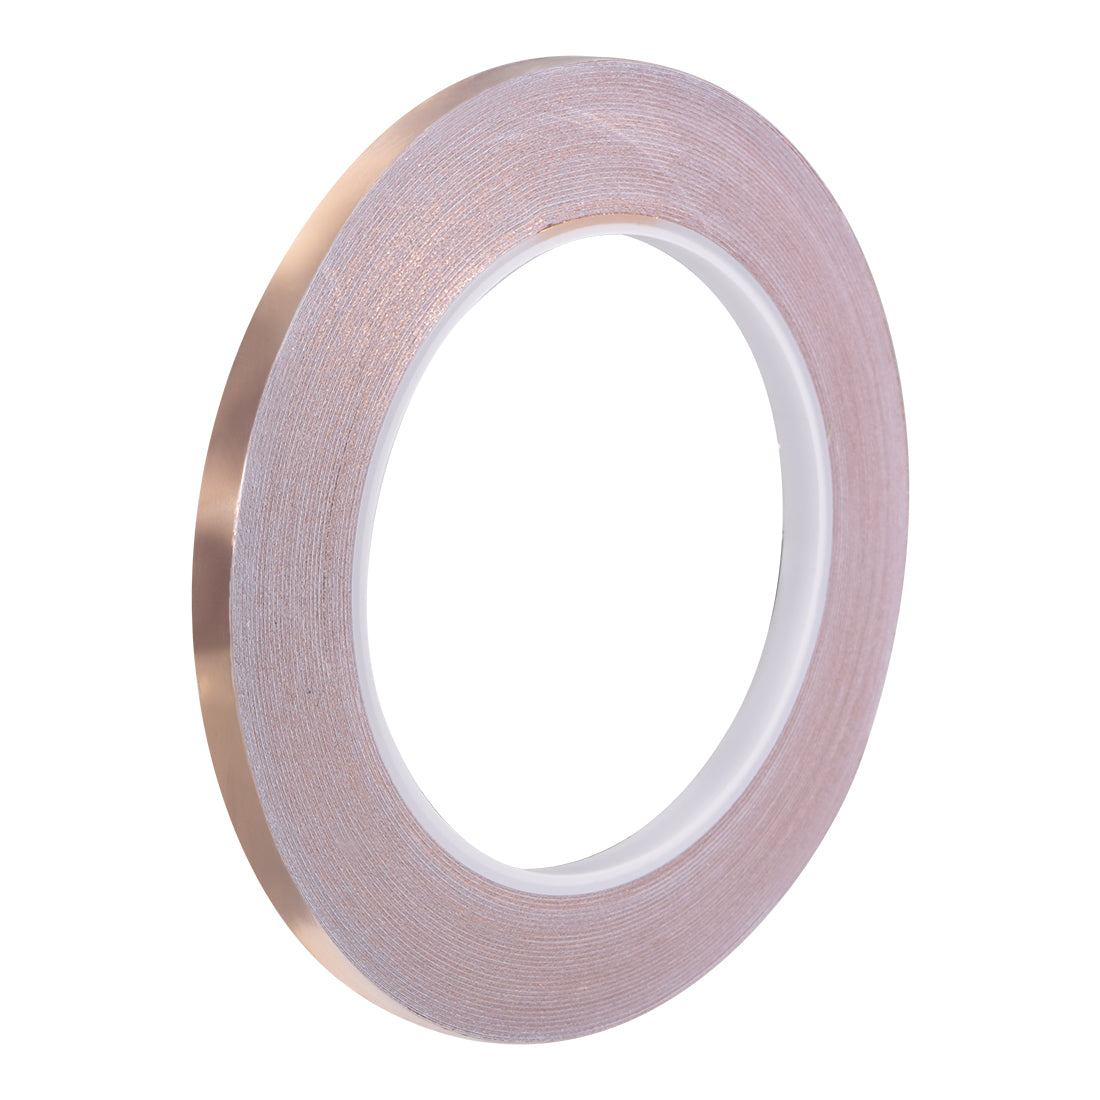 Uxcell Uxcell Single-sided Conductive Tape Copper Foil Tape 8mm x 50m(164ft) for EMI Shielding, Stained Glass, Electrical Repairs